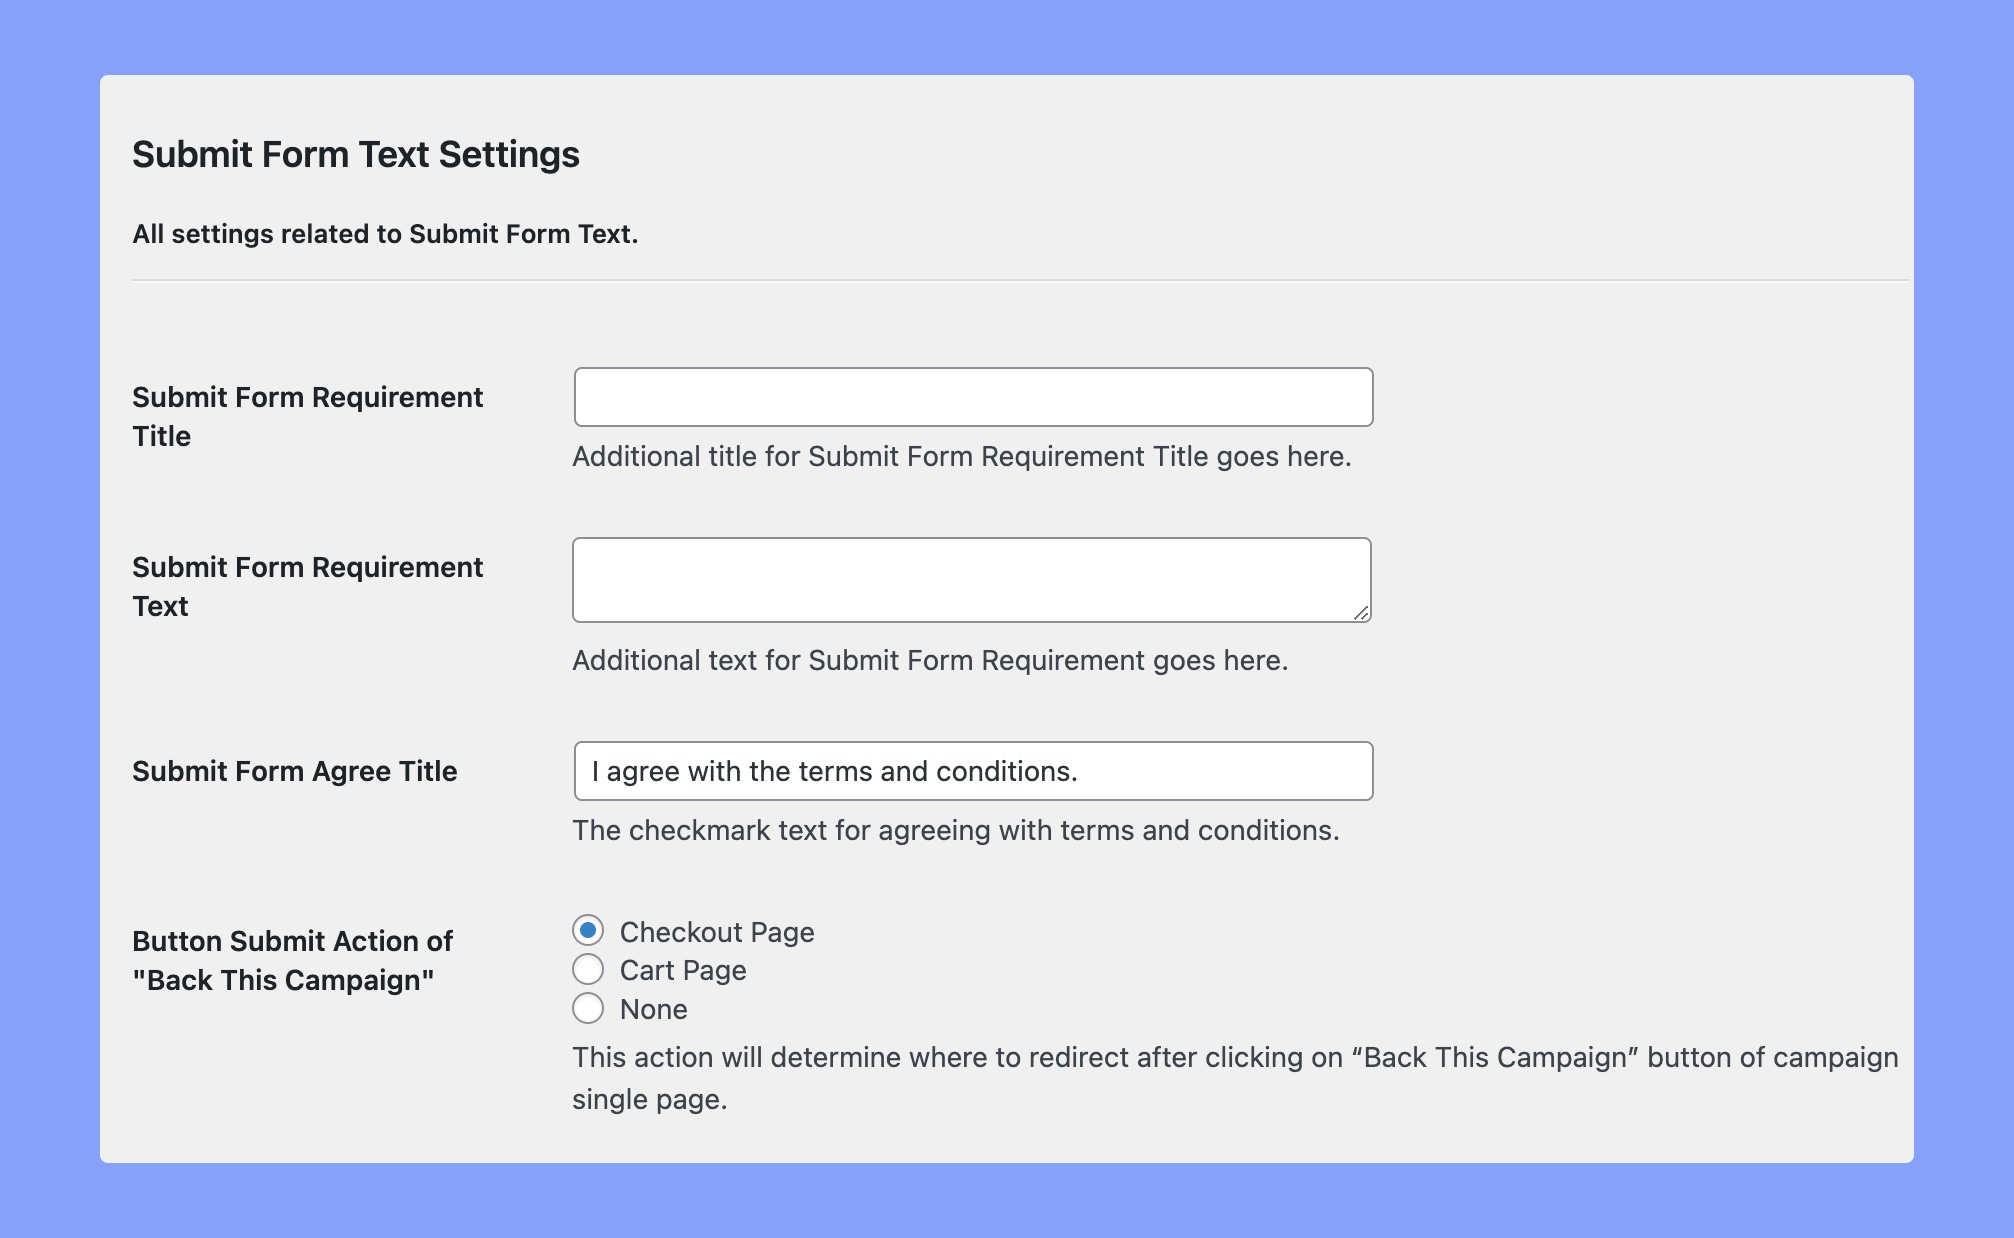 Submit Form Text Settings